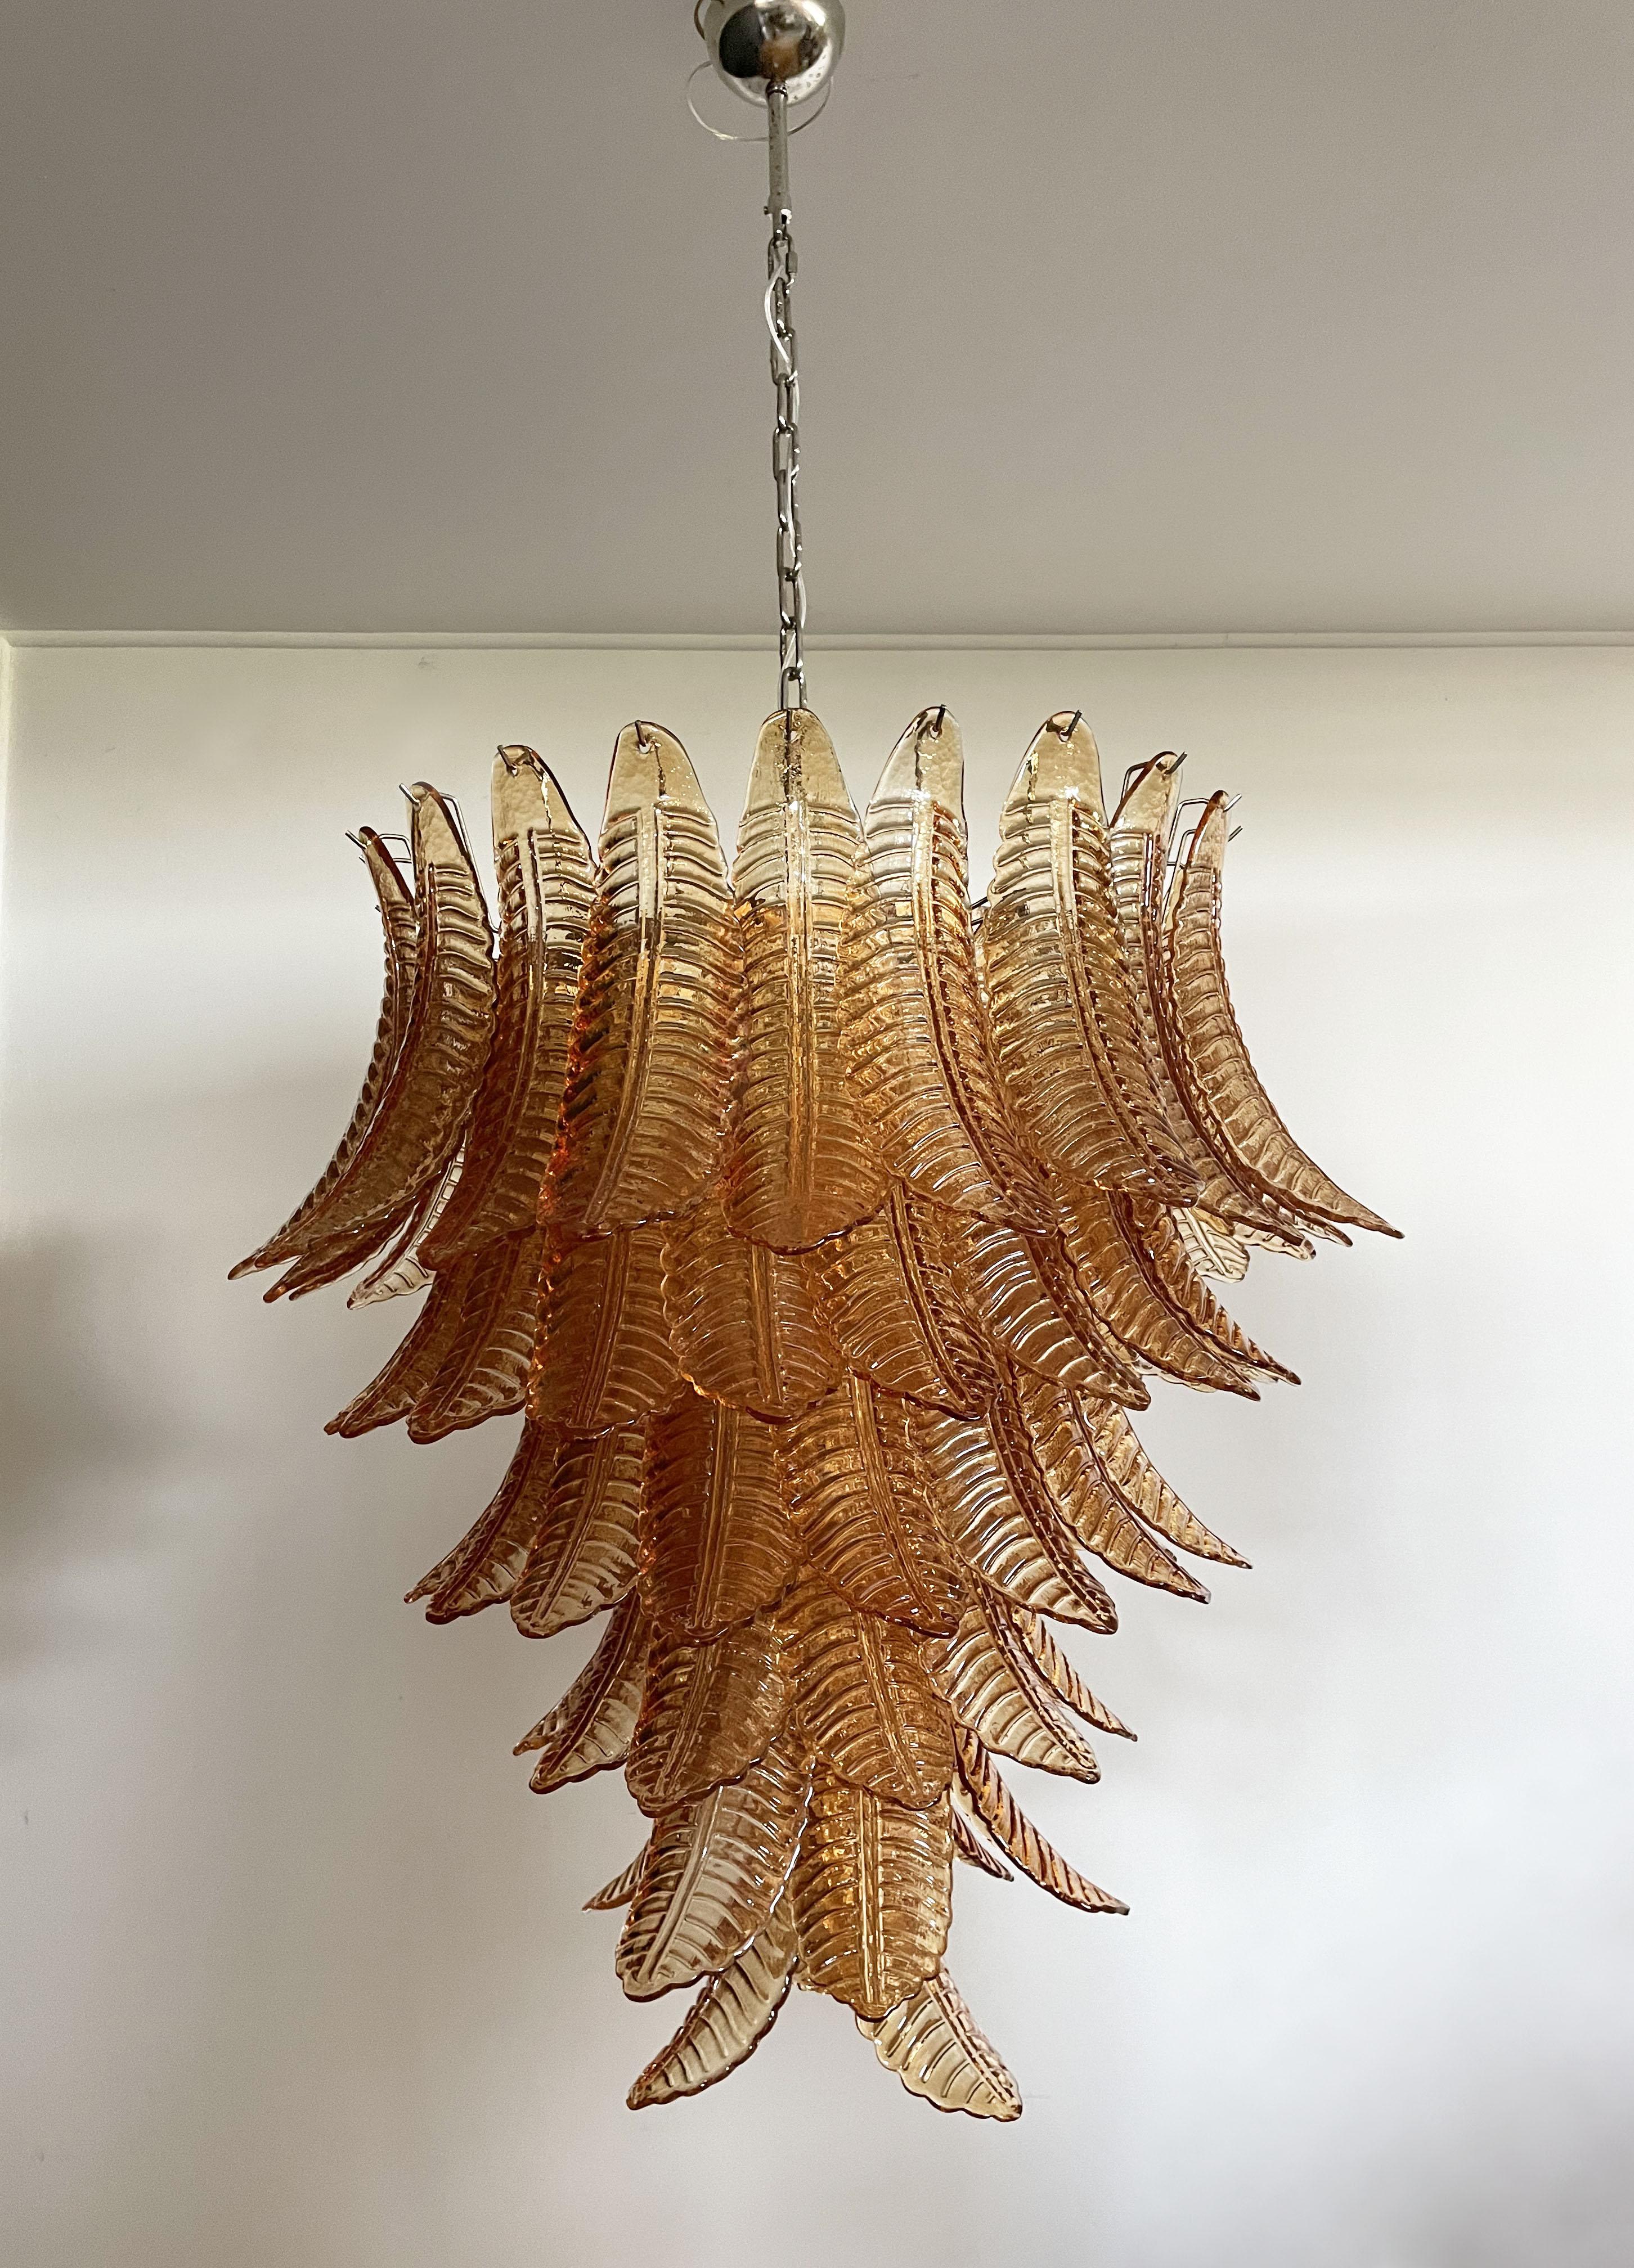 Beautiful and huge Italian Murano Chandelier composed of 75 splendid amber glasses that give a very elegant look. The glasses of this chandelier are real works of art.
Dimensions: 65.90 inches (170 cm) height with chain; 38.75 inches (100 cm)